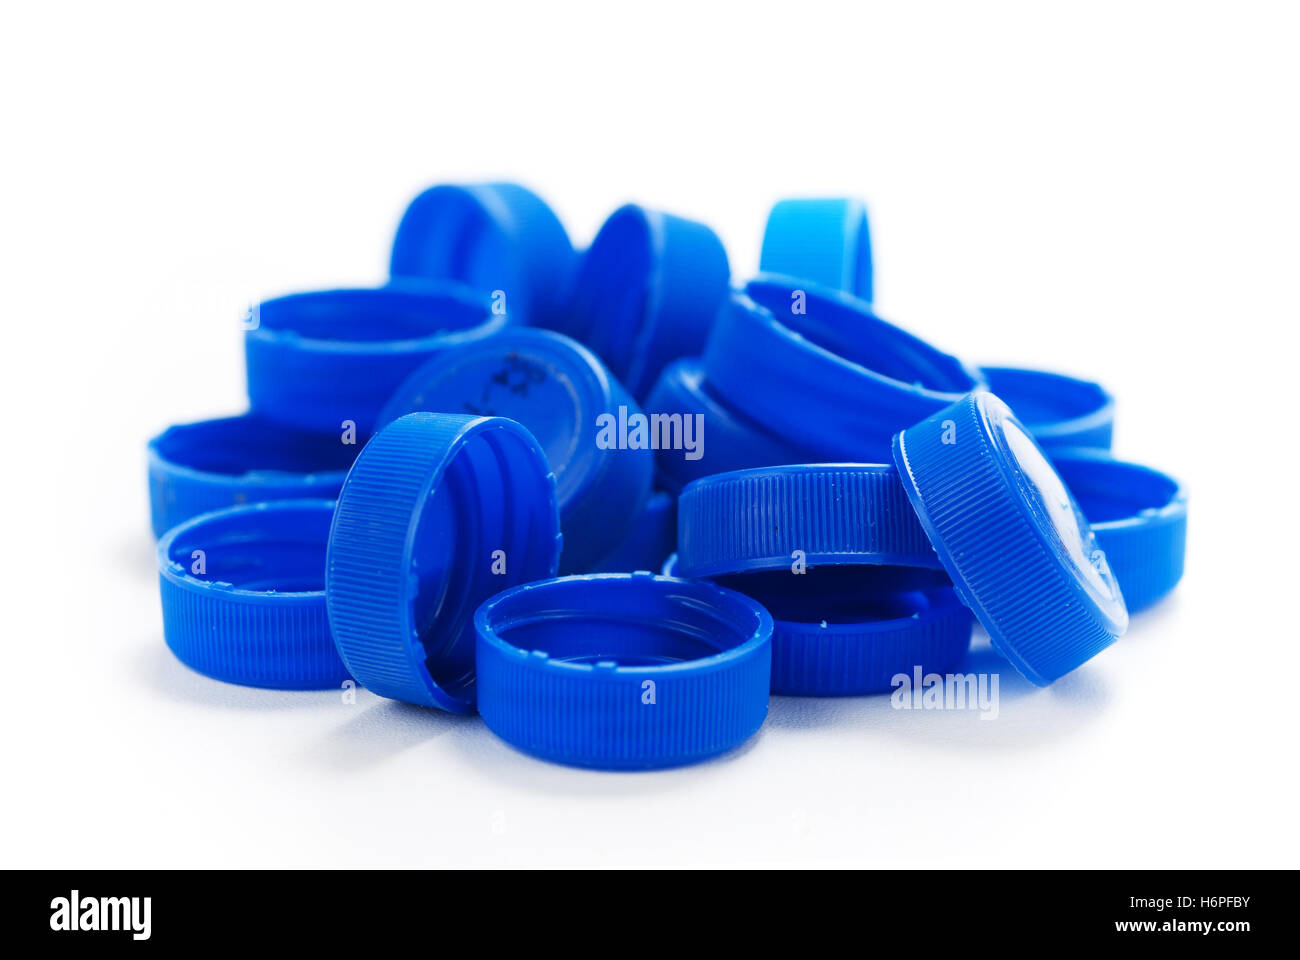 blue bottle cap plastic synthetic material used recycling heap pile backdrop background white recycle Stock Photo